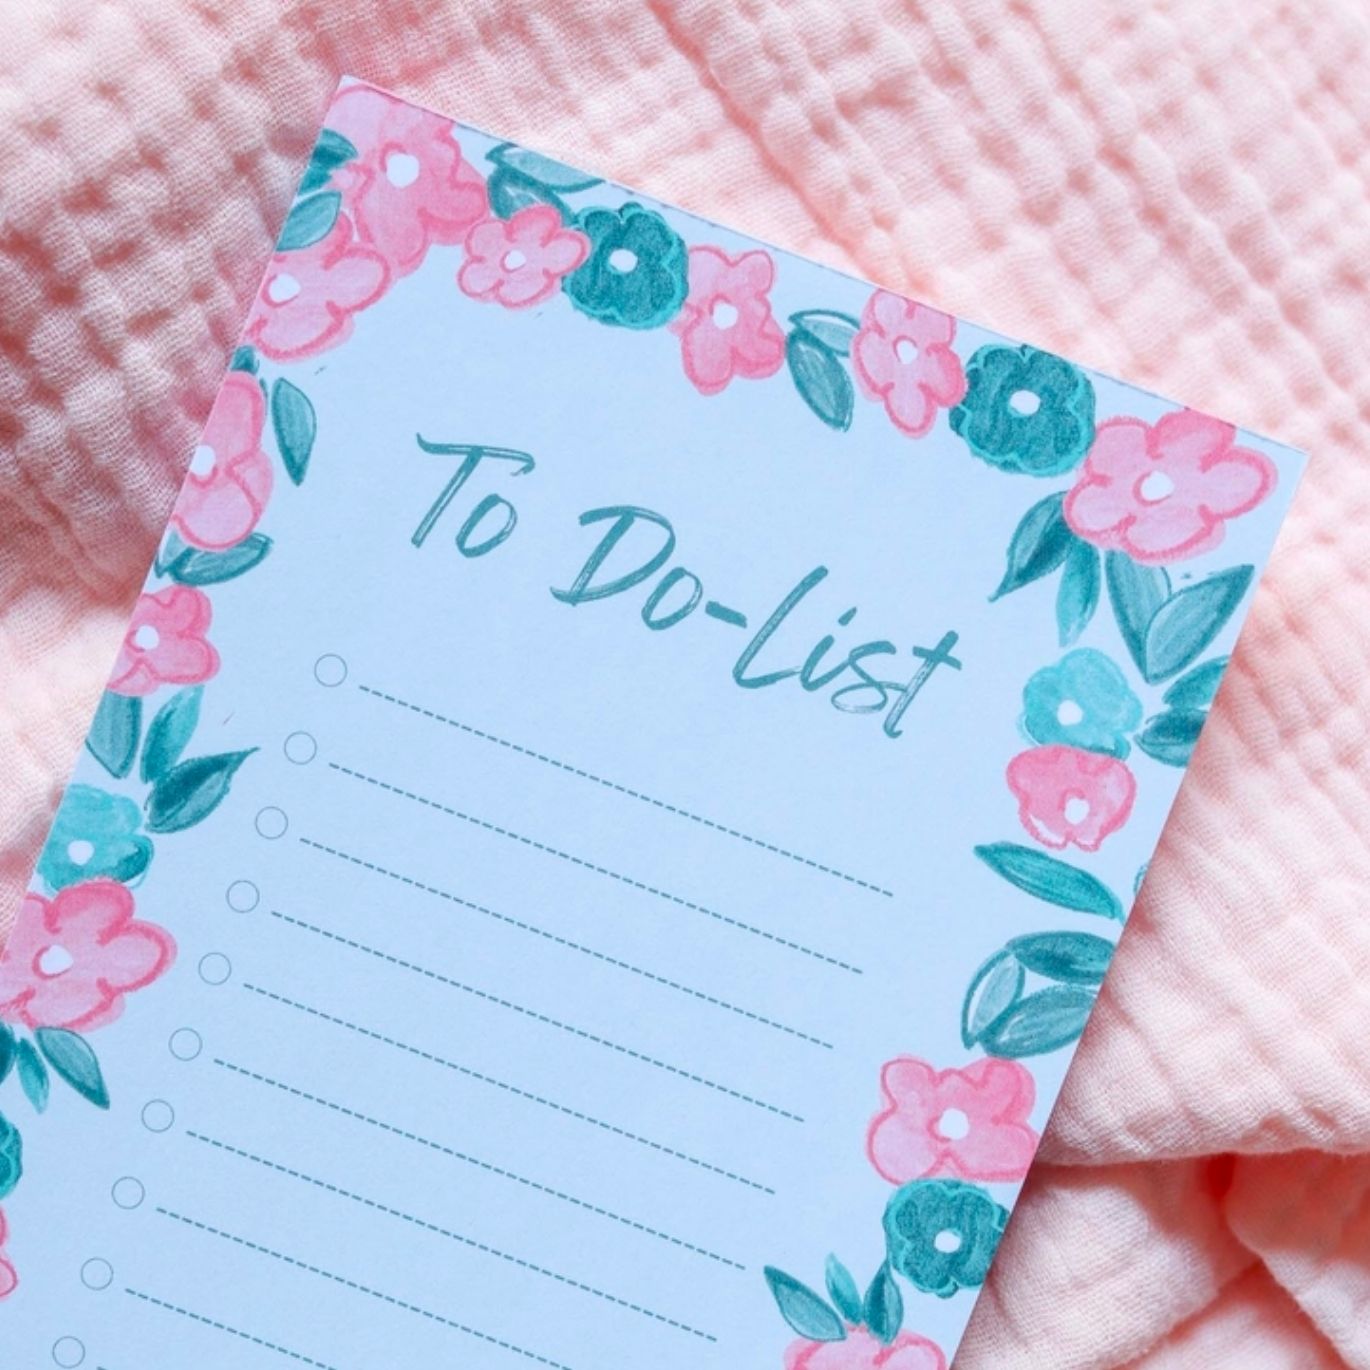 Bloc-notes "To do list" - Lise Tailor